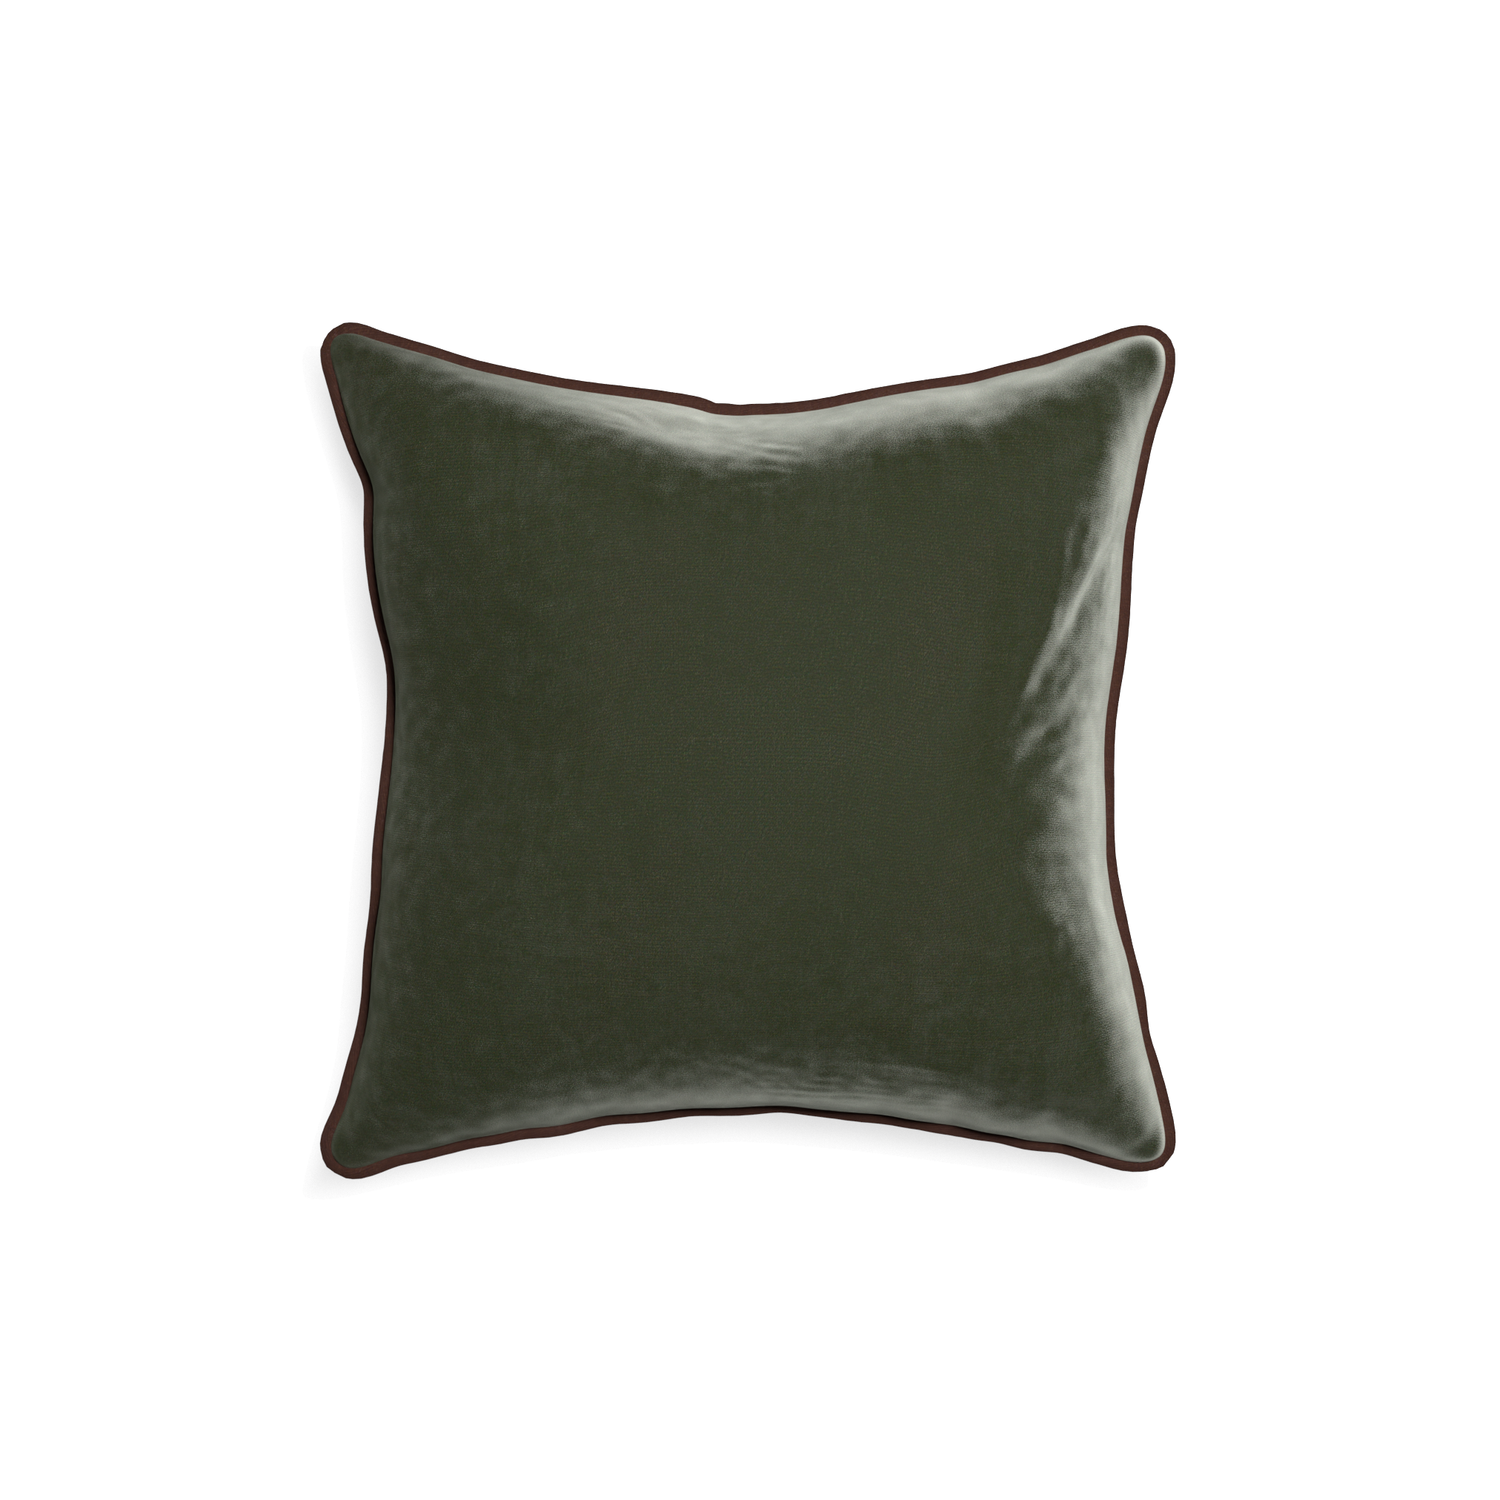 square fern green velvet pillow with brown piping